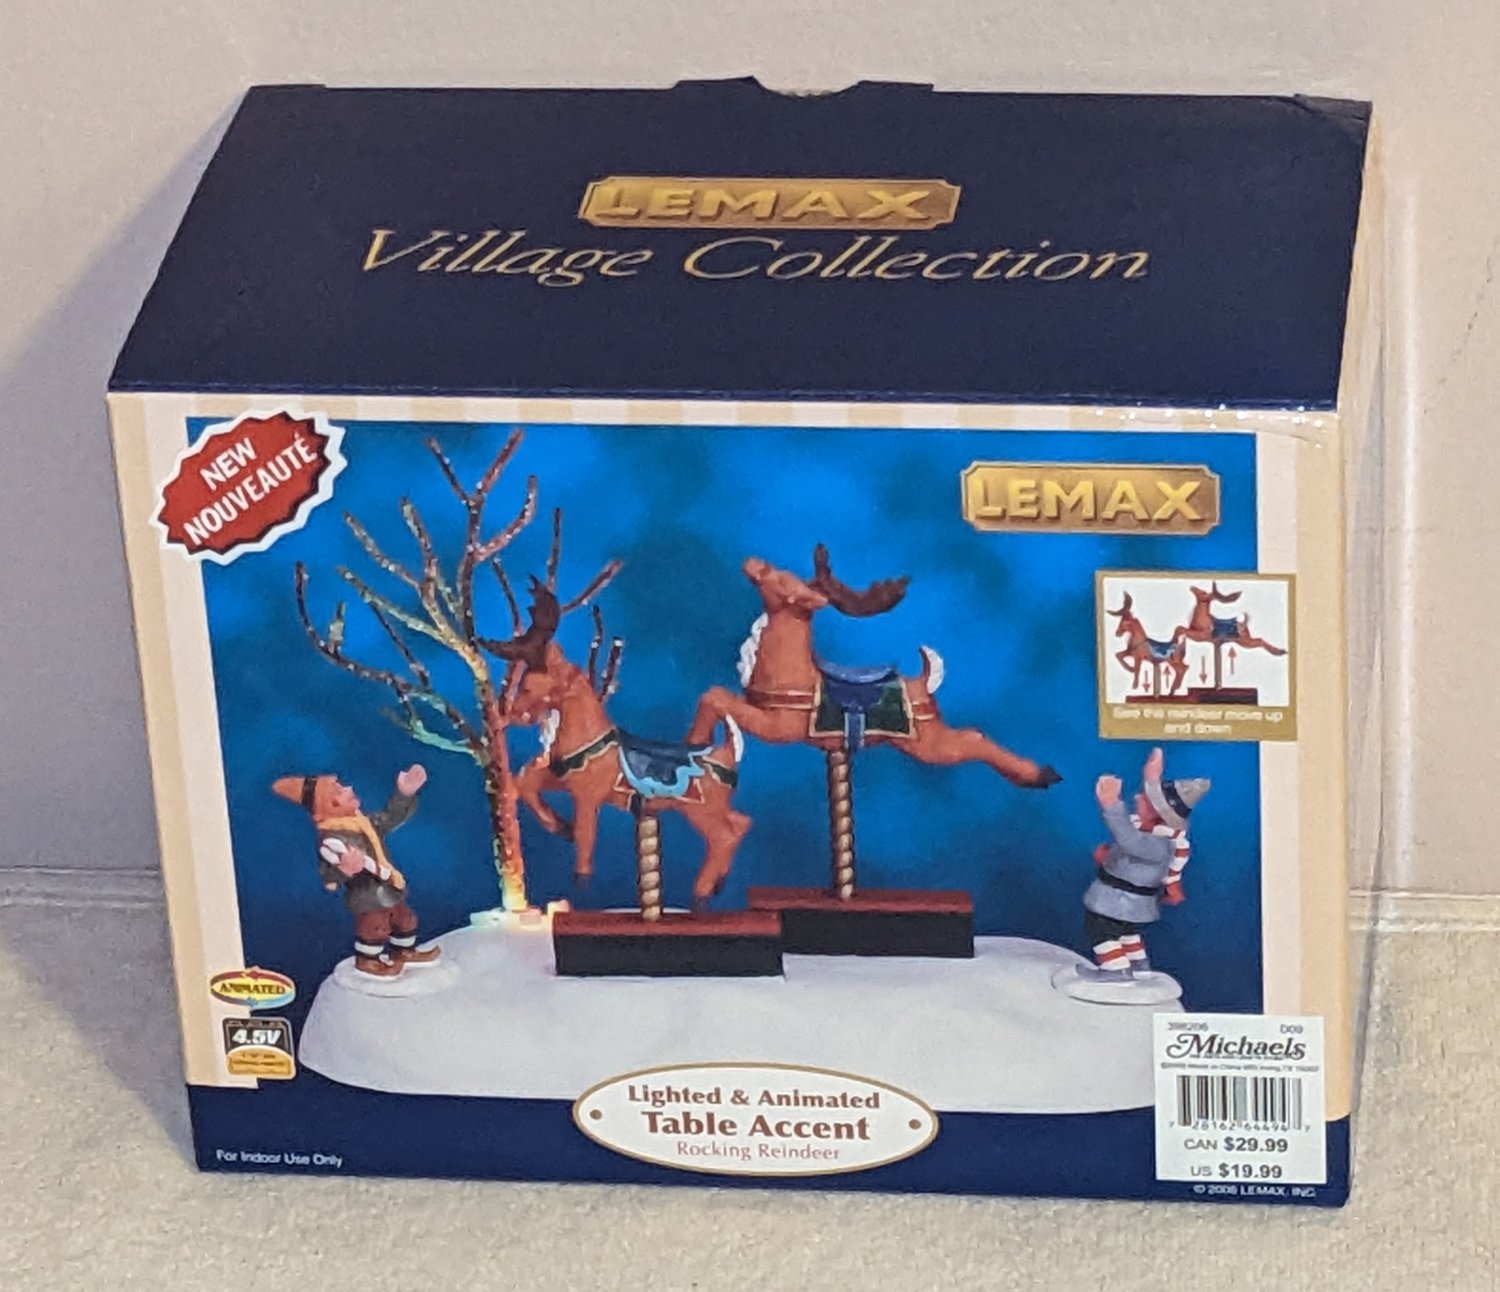 Lemax 64494 Rocking Reindeer Lighted & Animated Table Accent Village Collection Retired 2006